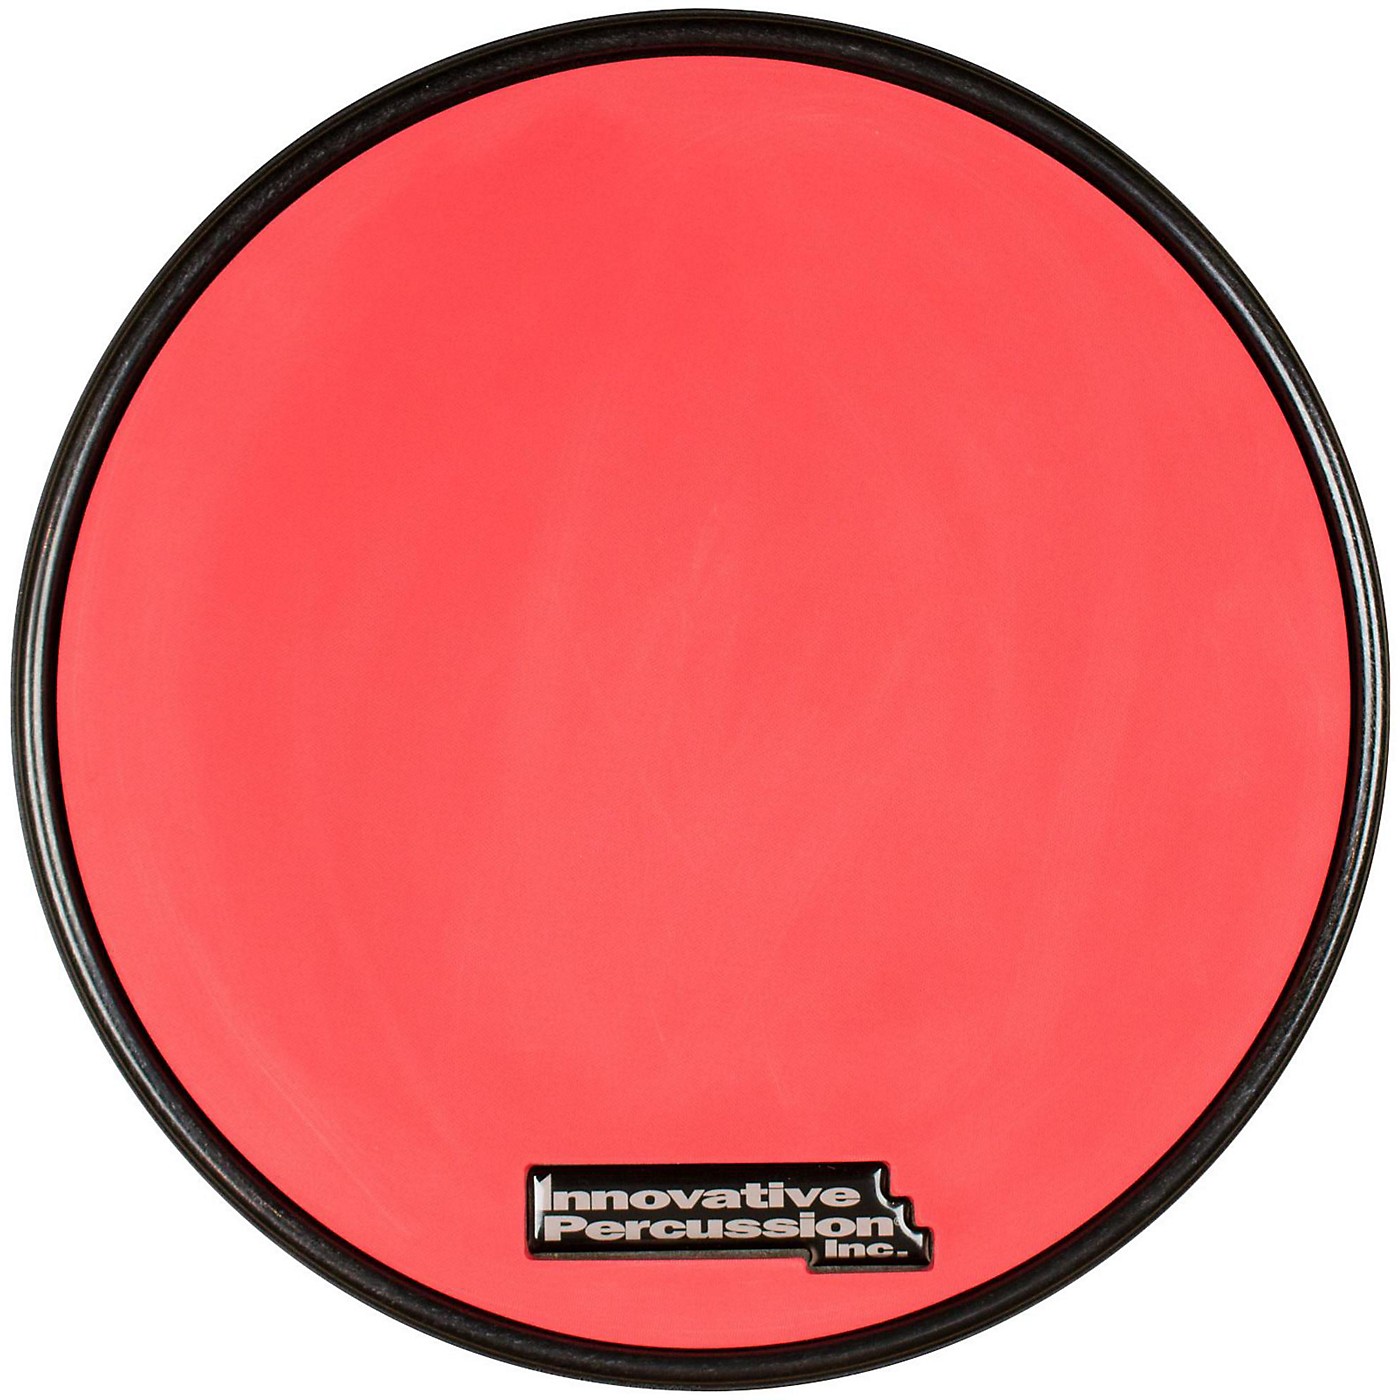 Innovative Percussion Red Gum Rubber Pad with Rim thumbnail